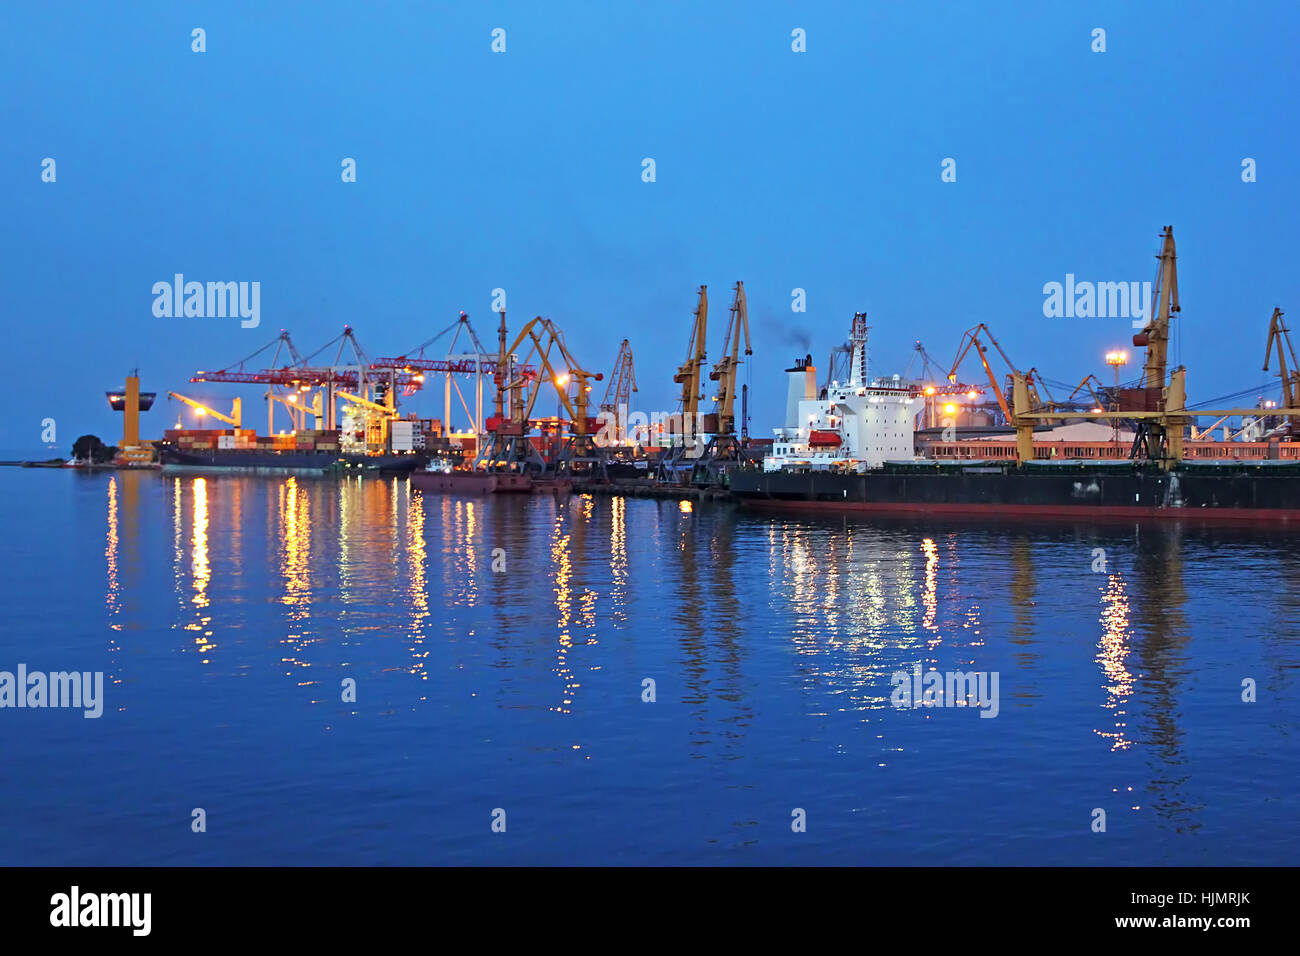 Seaport at night with light reflections on sea water Stock Photo